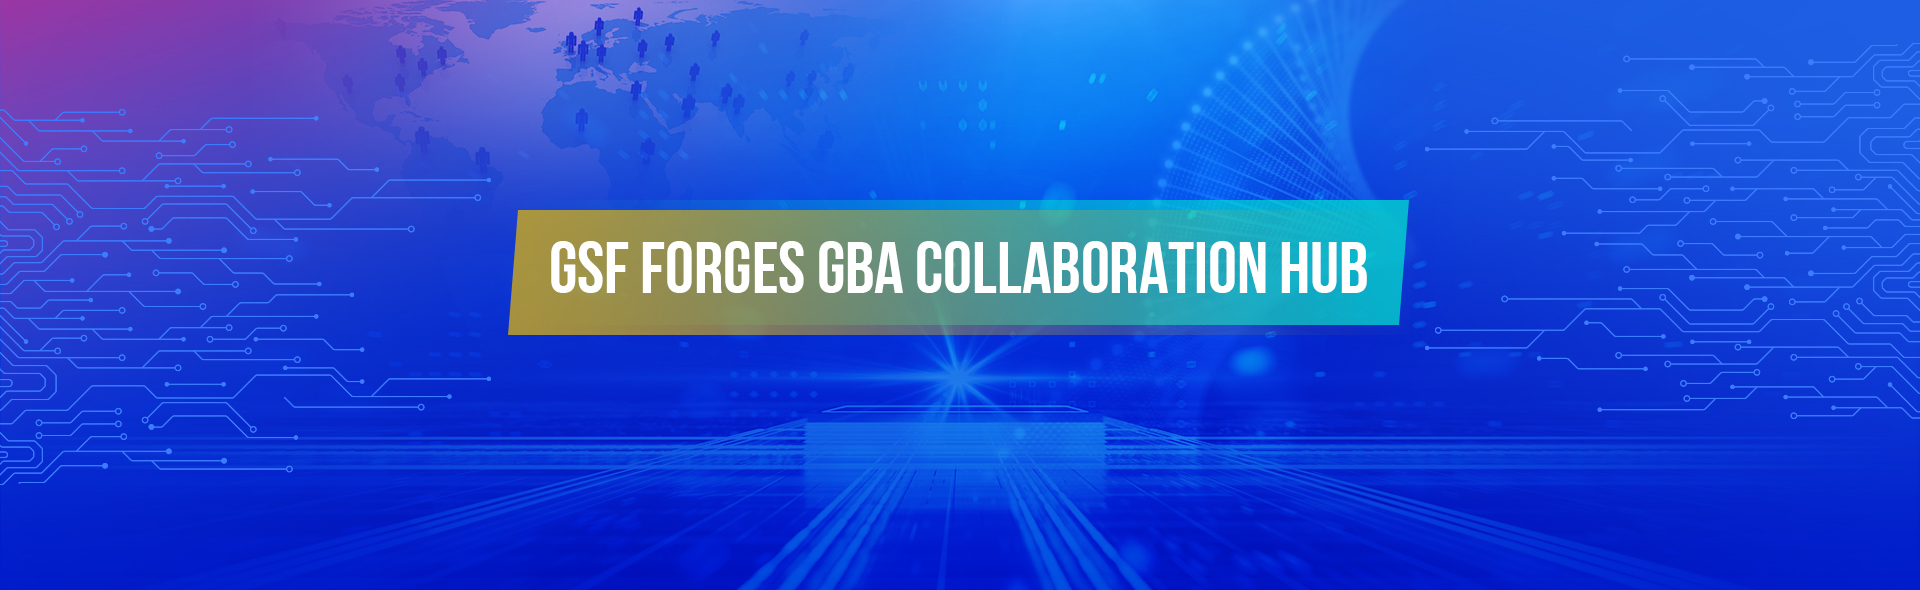 GSF Forges GBA Collaboration Hub